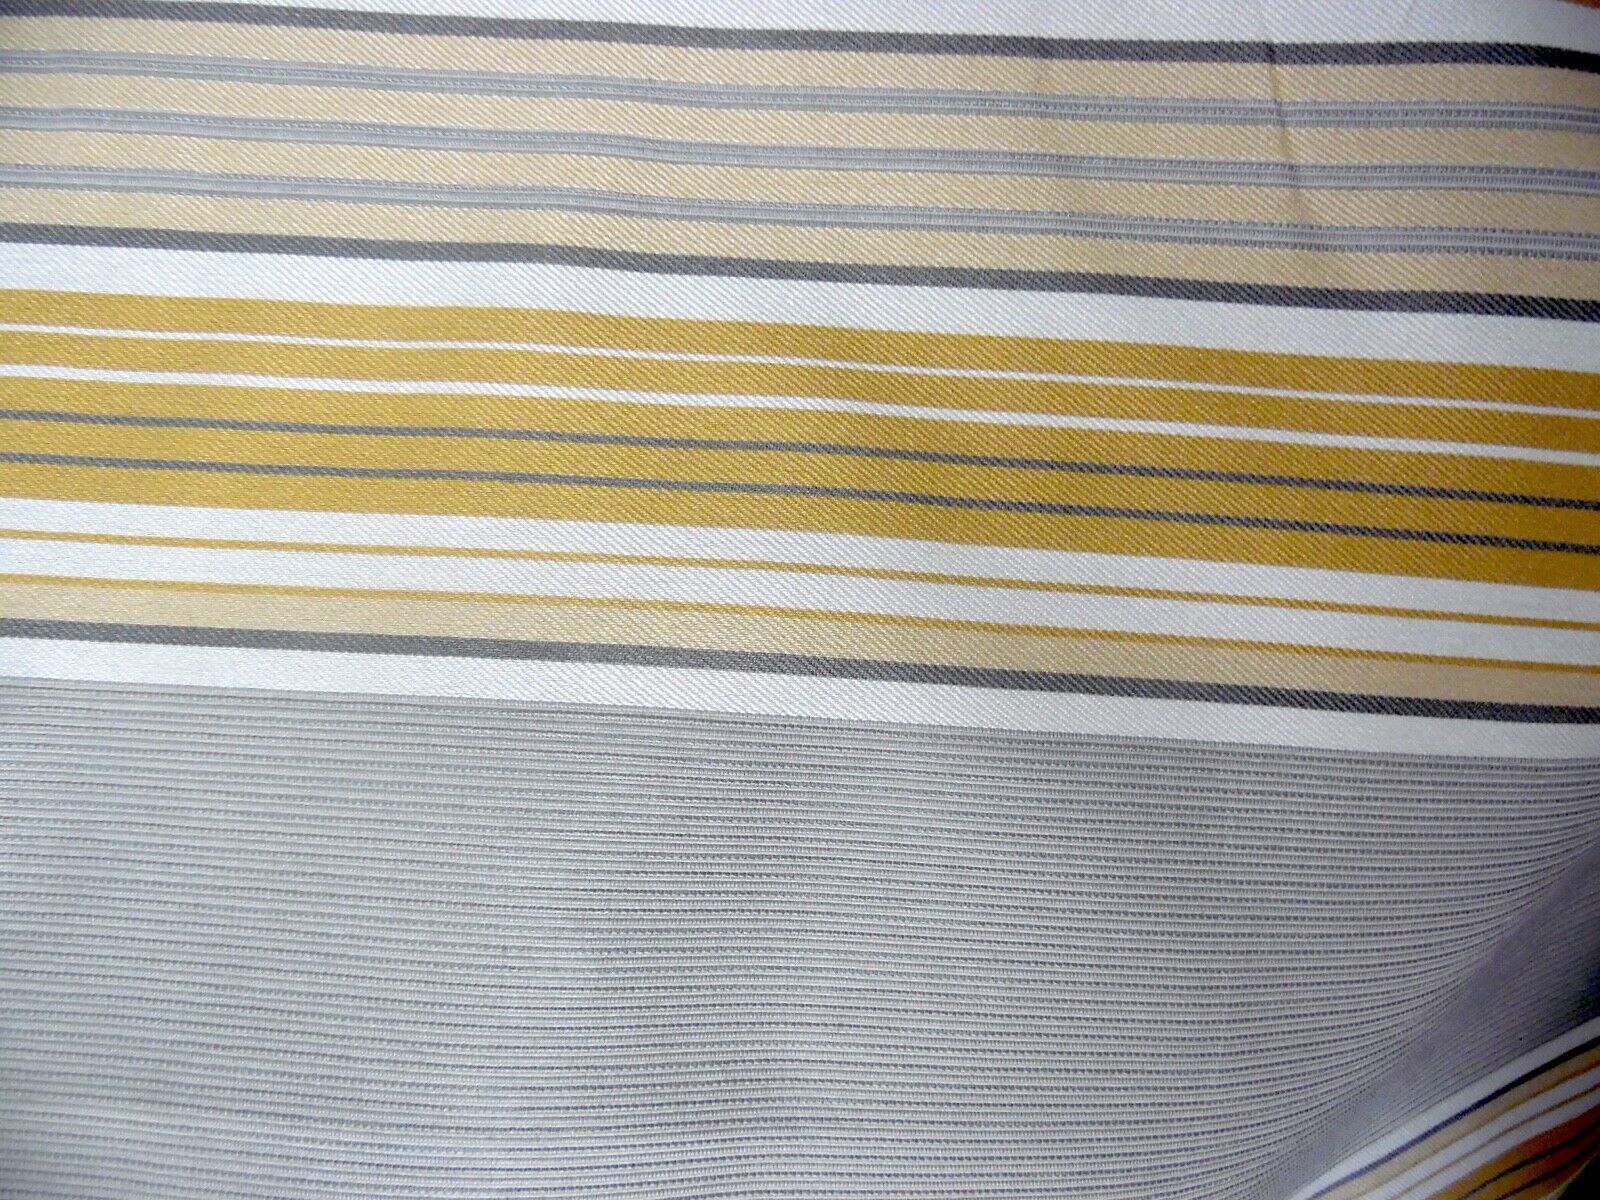 Primary image for BULL DENIM STRIPES UPHOLSTERY DRAPERY FABRIC GREY AND GOLDEN SHADES BY THE YARD